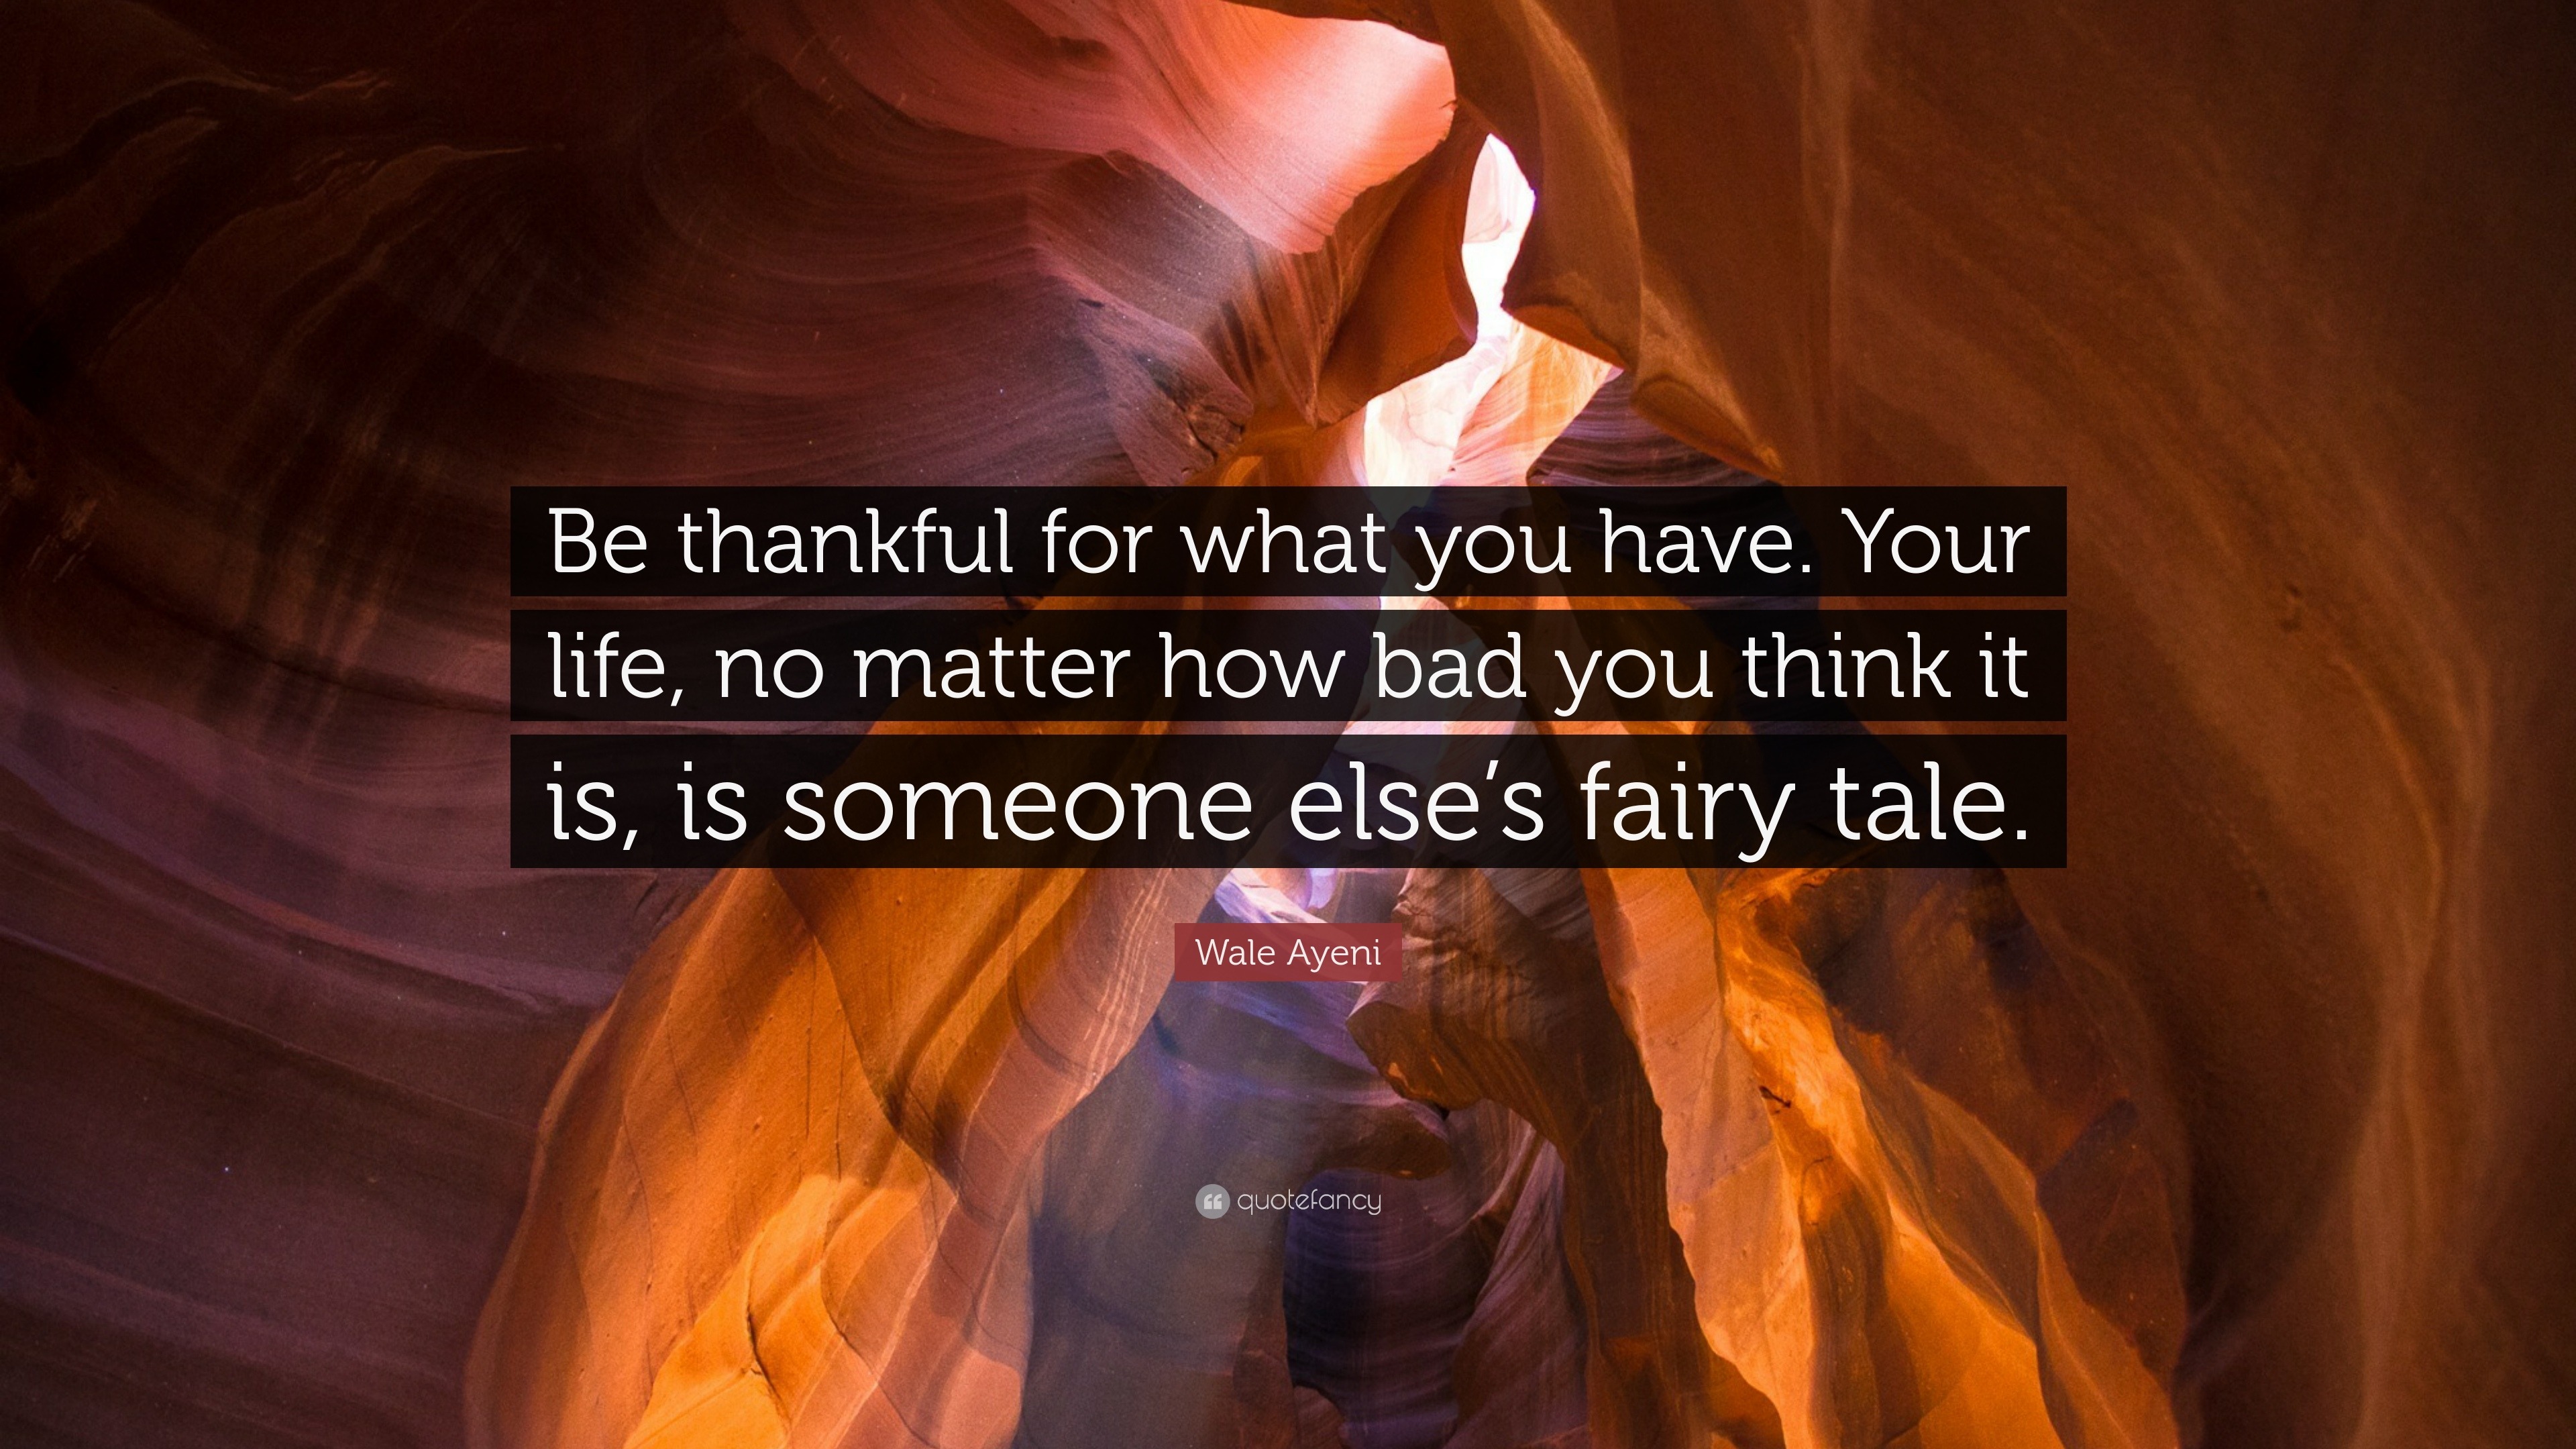 Wale Ayeni Quote “Be thankful for what you have Your life no